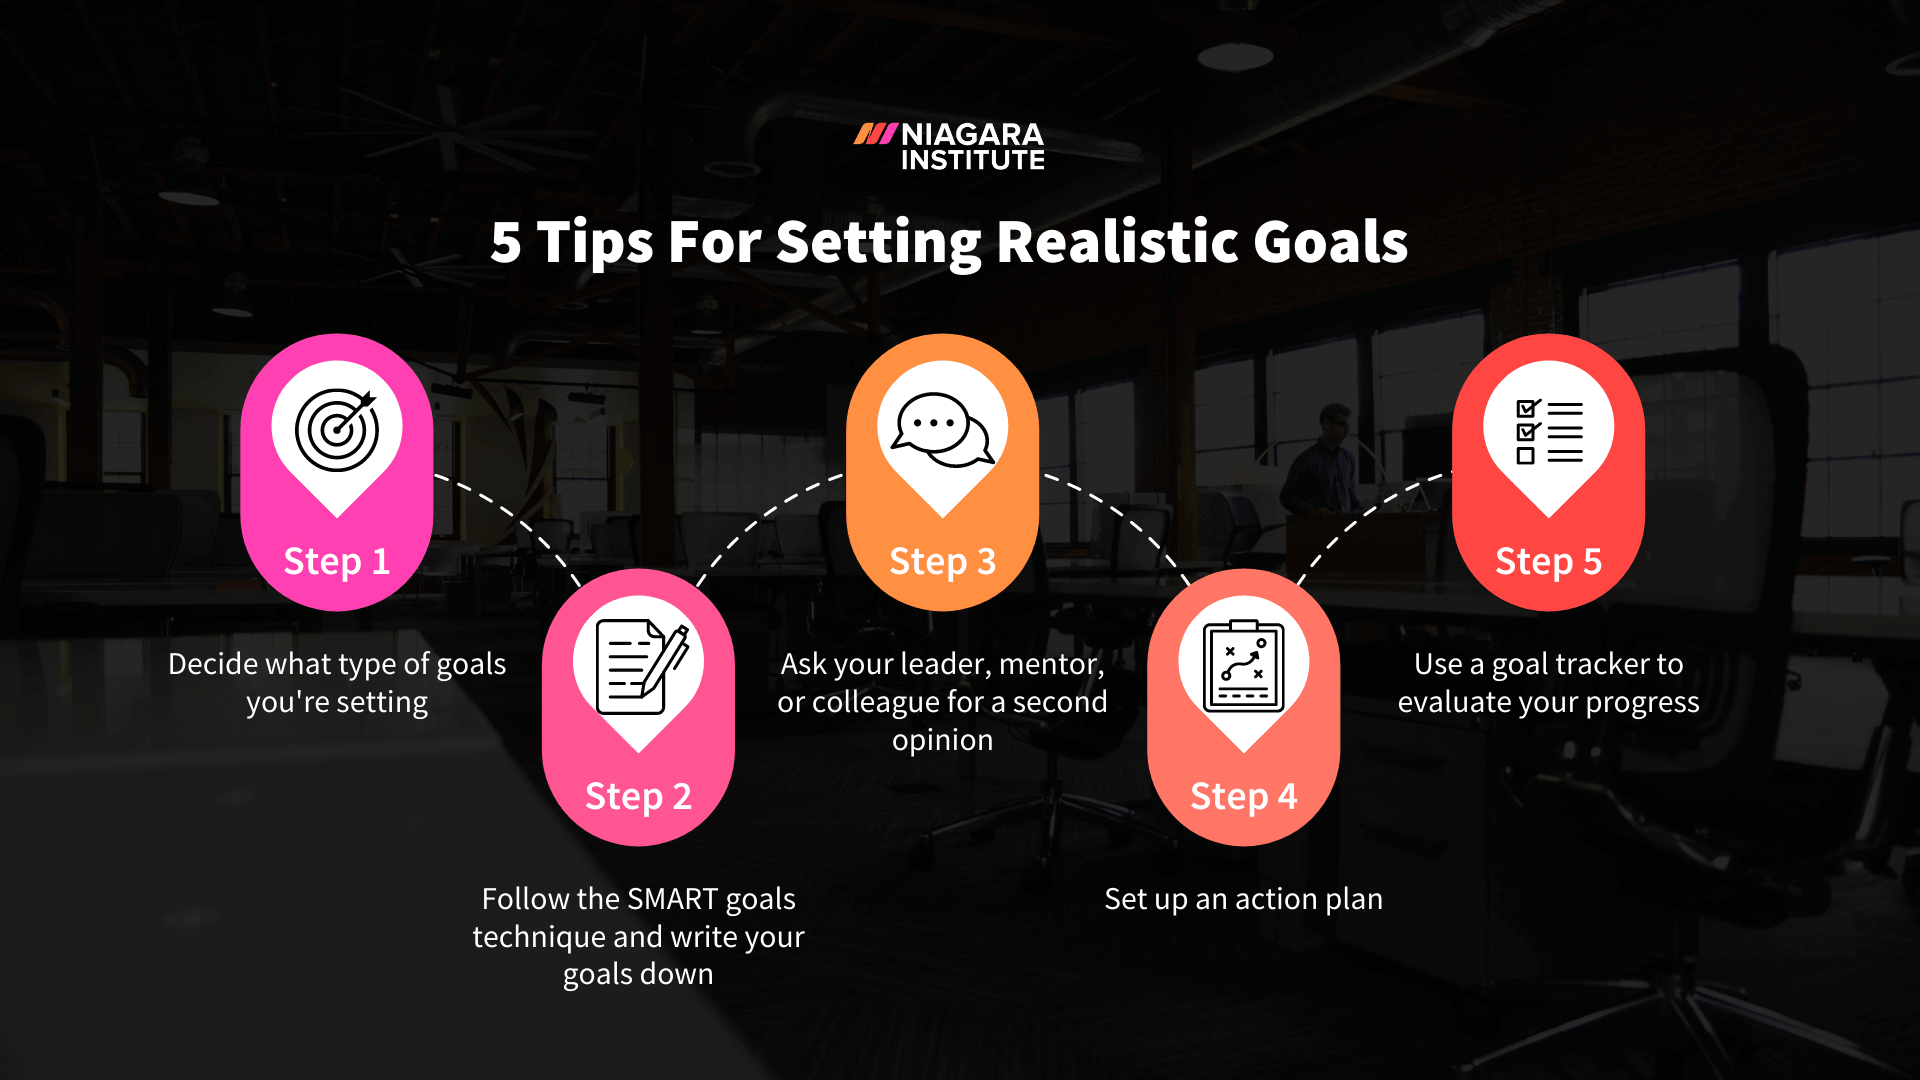 Why Is It Important to Set Realistic Goals?